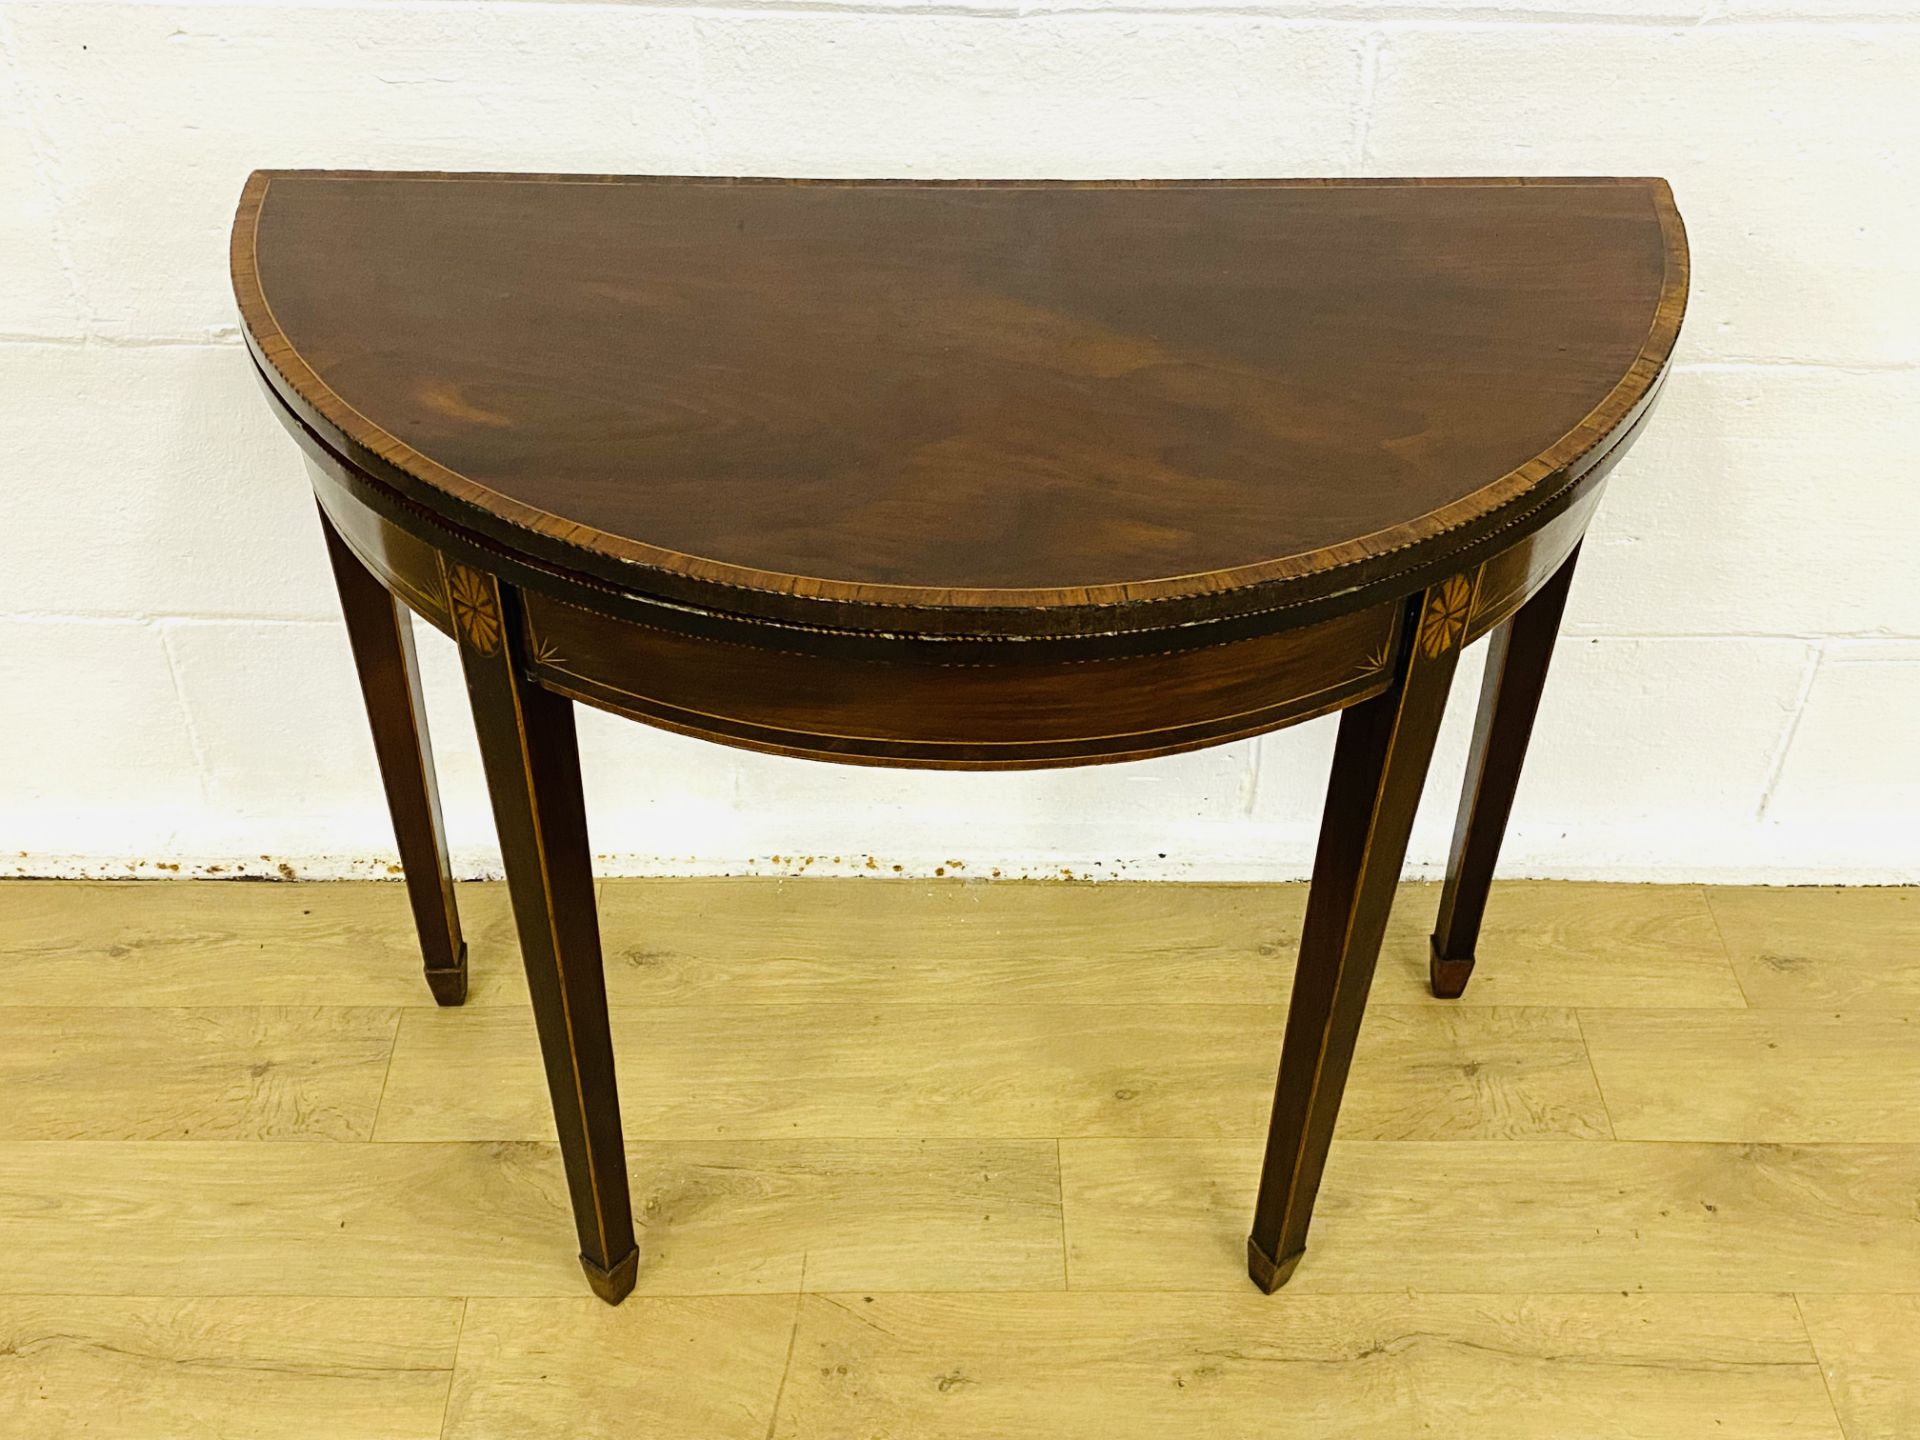 Demi lune fold top table - Image 4 of 5